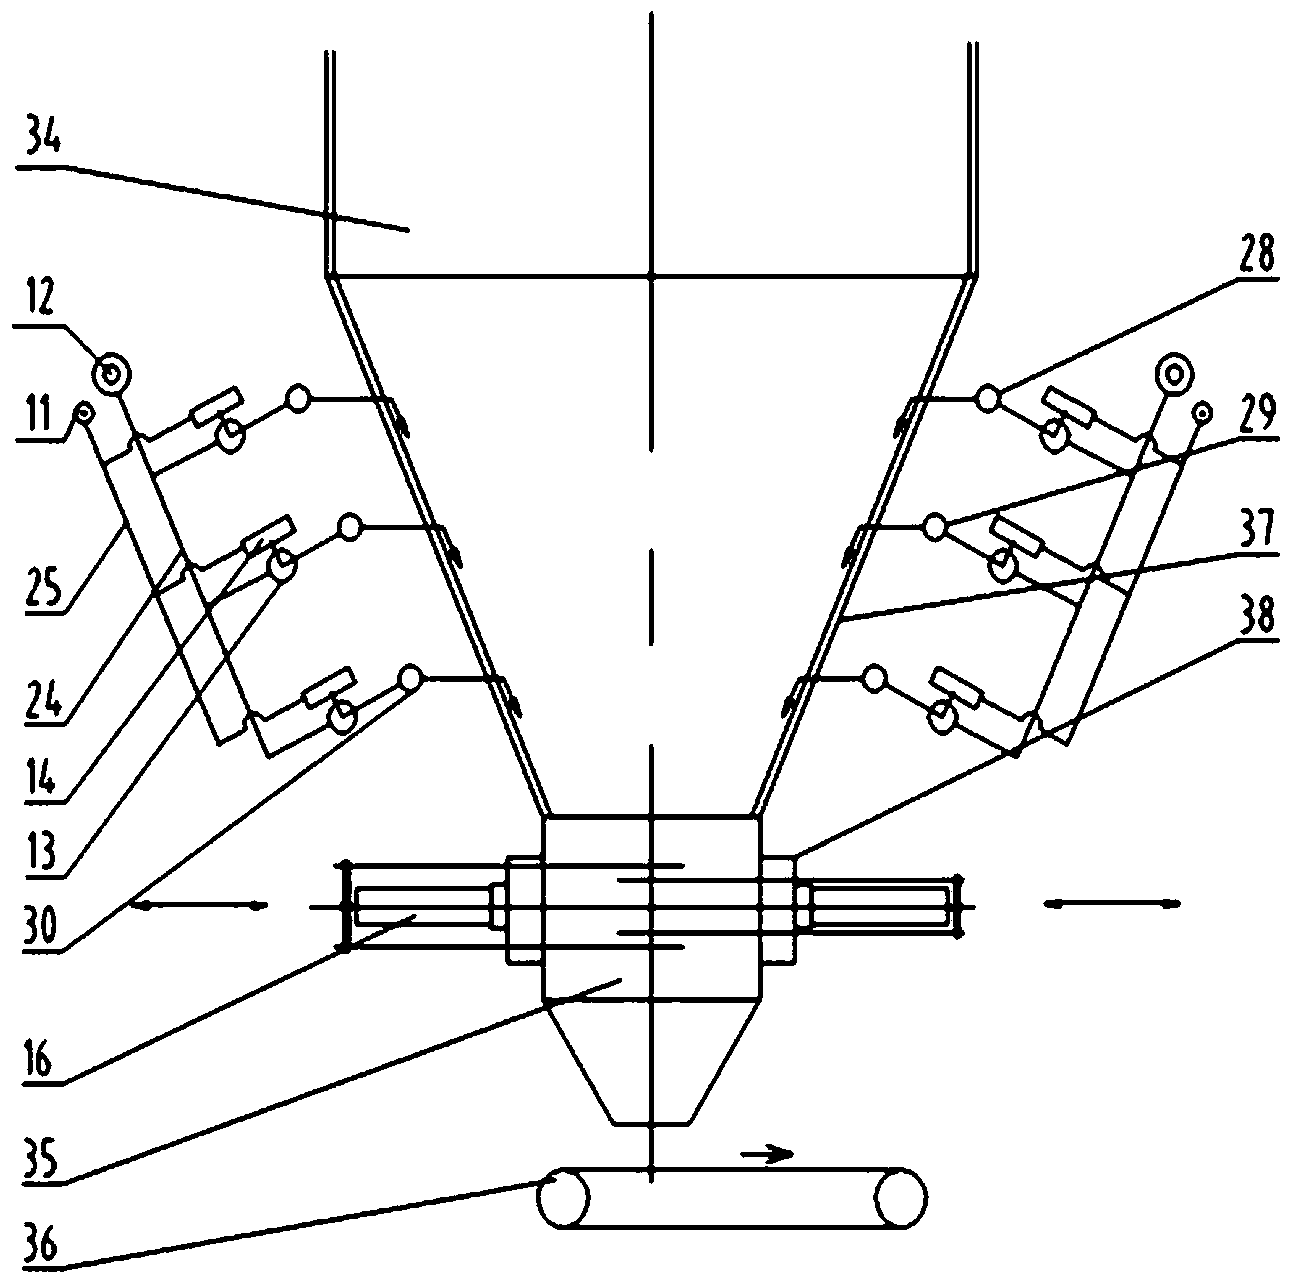 Rectangular taper metal bin blockage clearing equipment and use method thereof